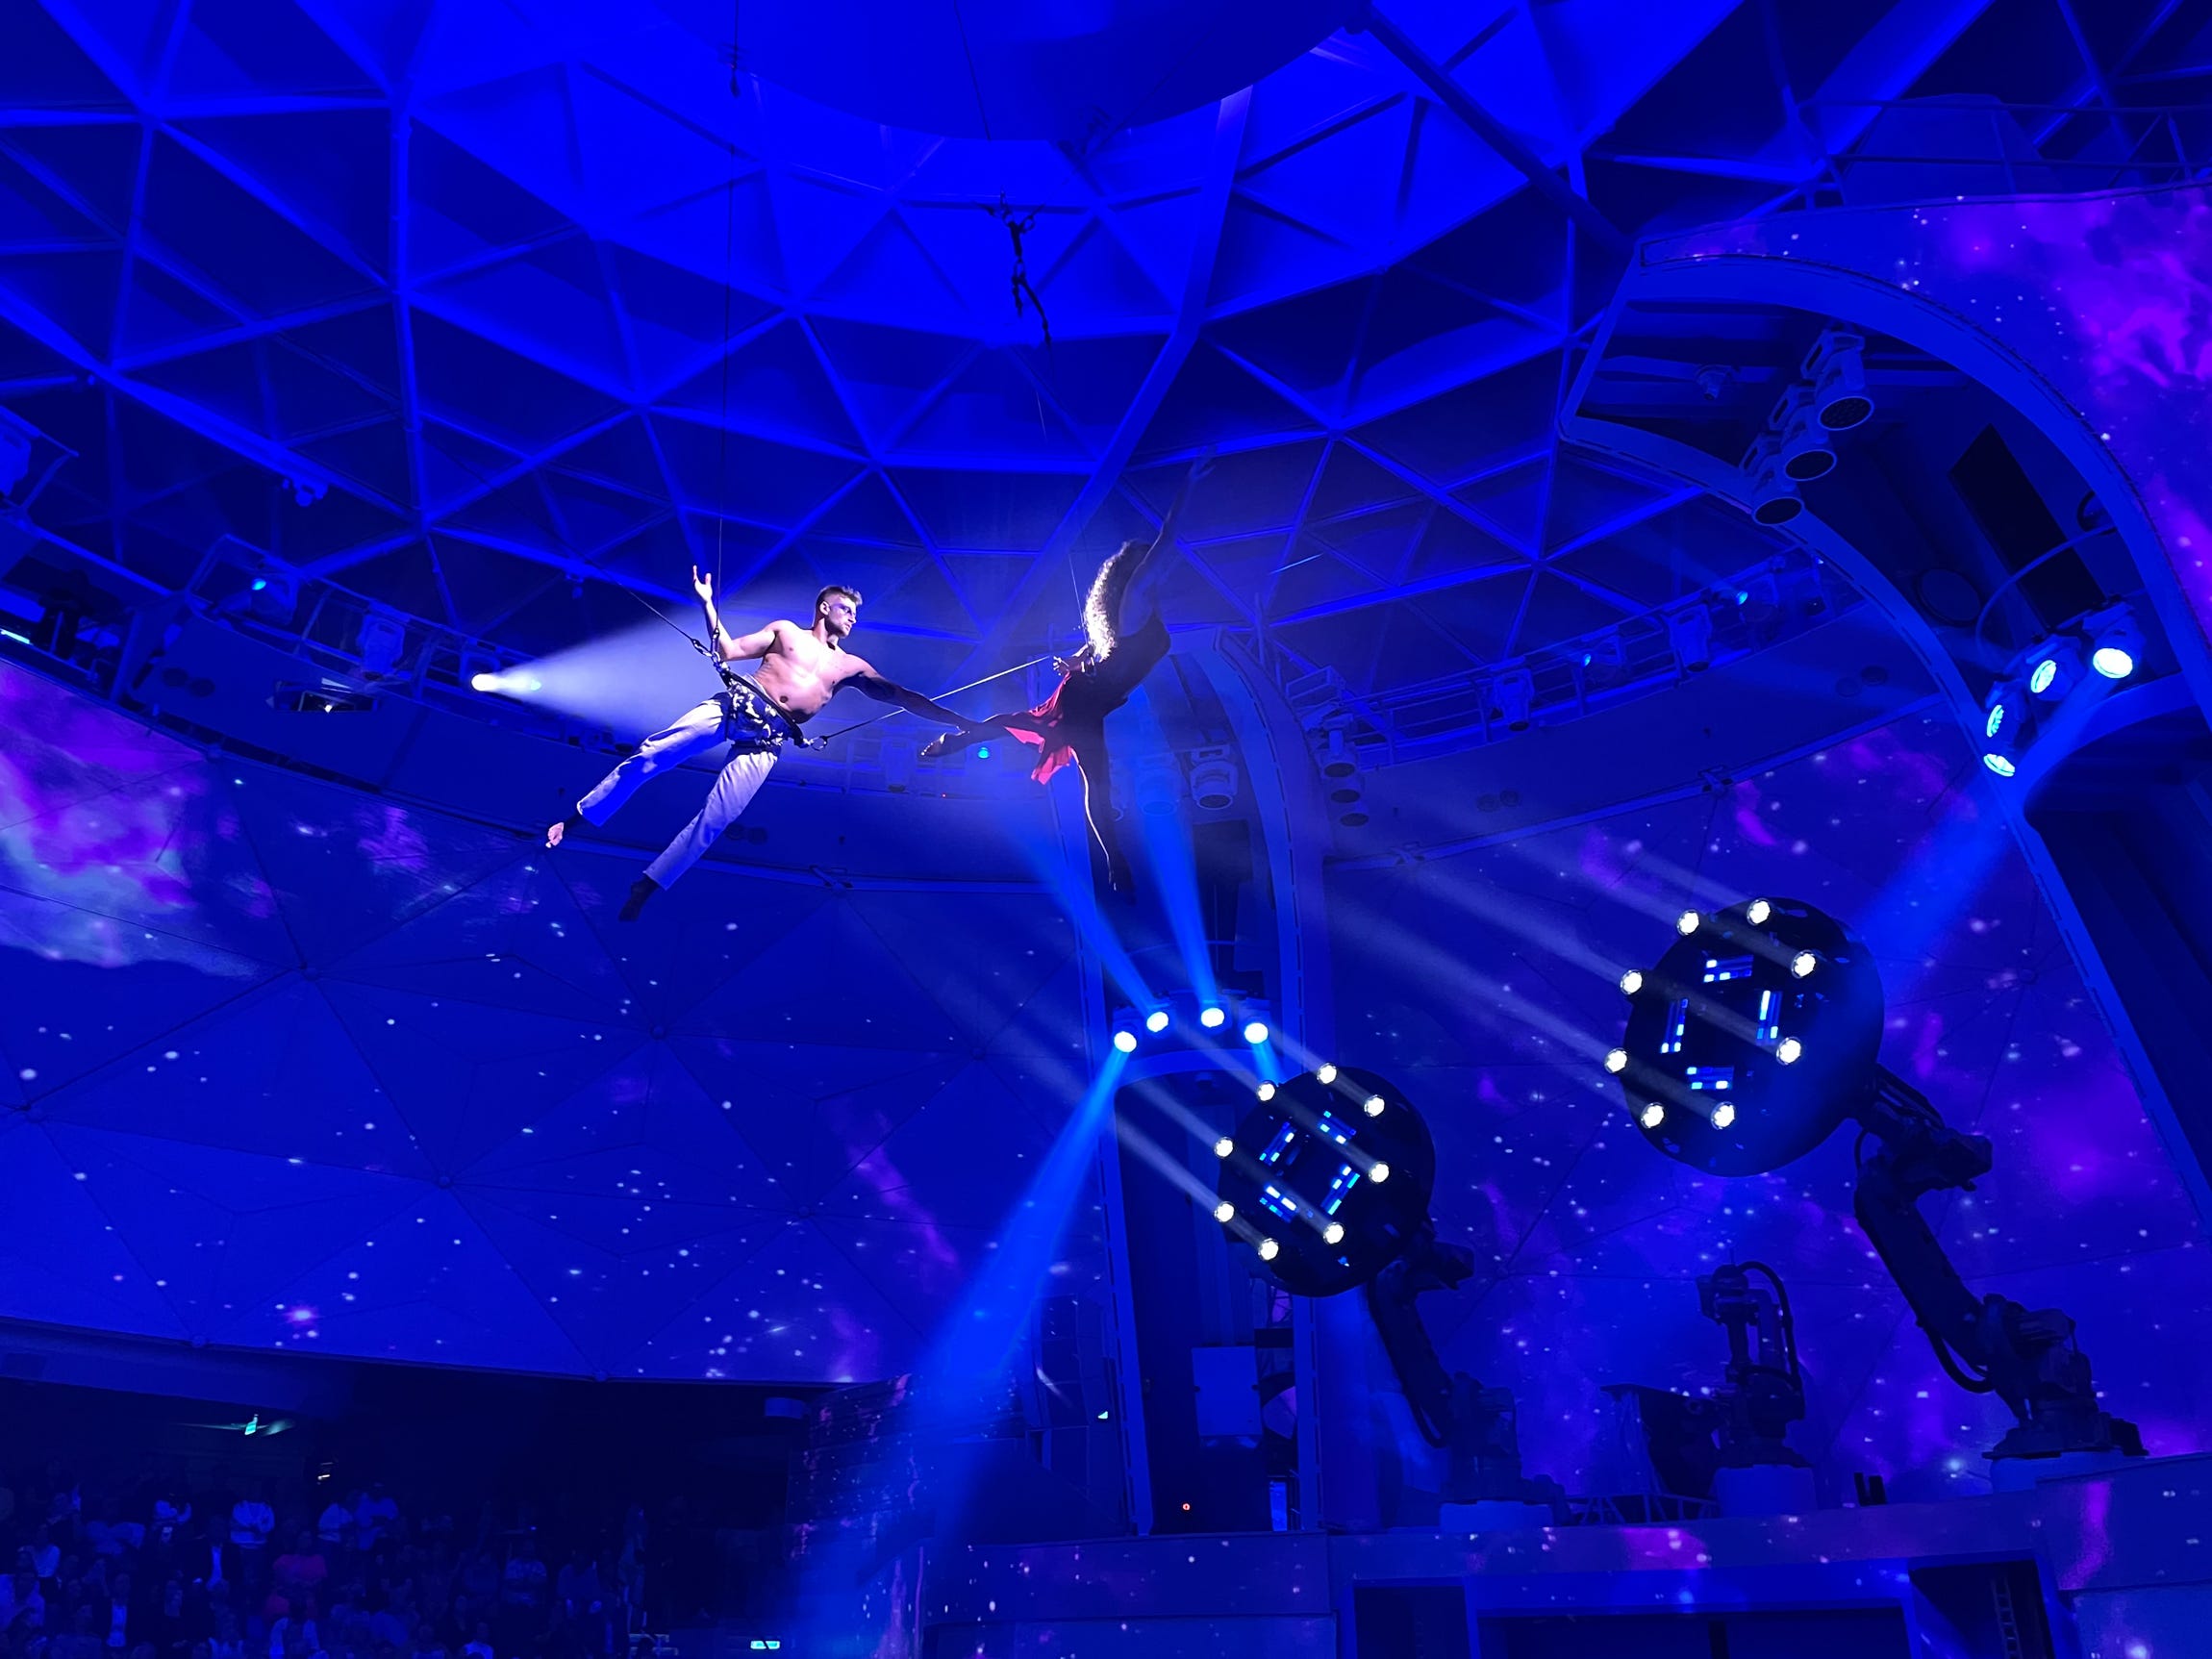 <p>This display of divers, nine-foot-tall robotic arms, synchronized swimmers, and skateboarders replaces the typical (ahem, cringe) cruise song-and-dance show.</p><p>No ice skaters are in this performance, though — they're busy with the ship's other ice skating show.</p>